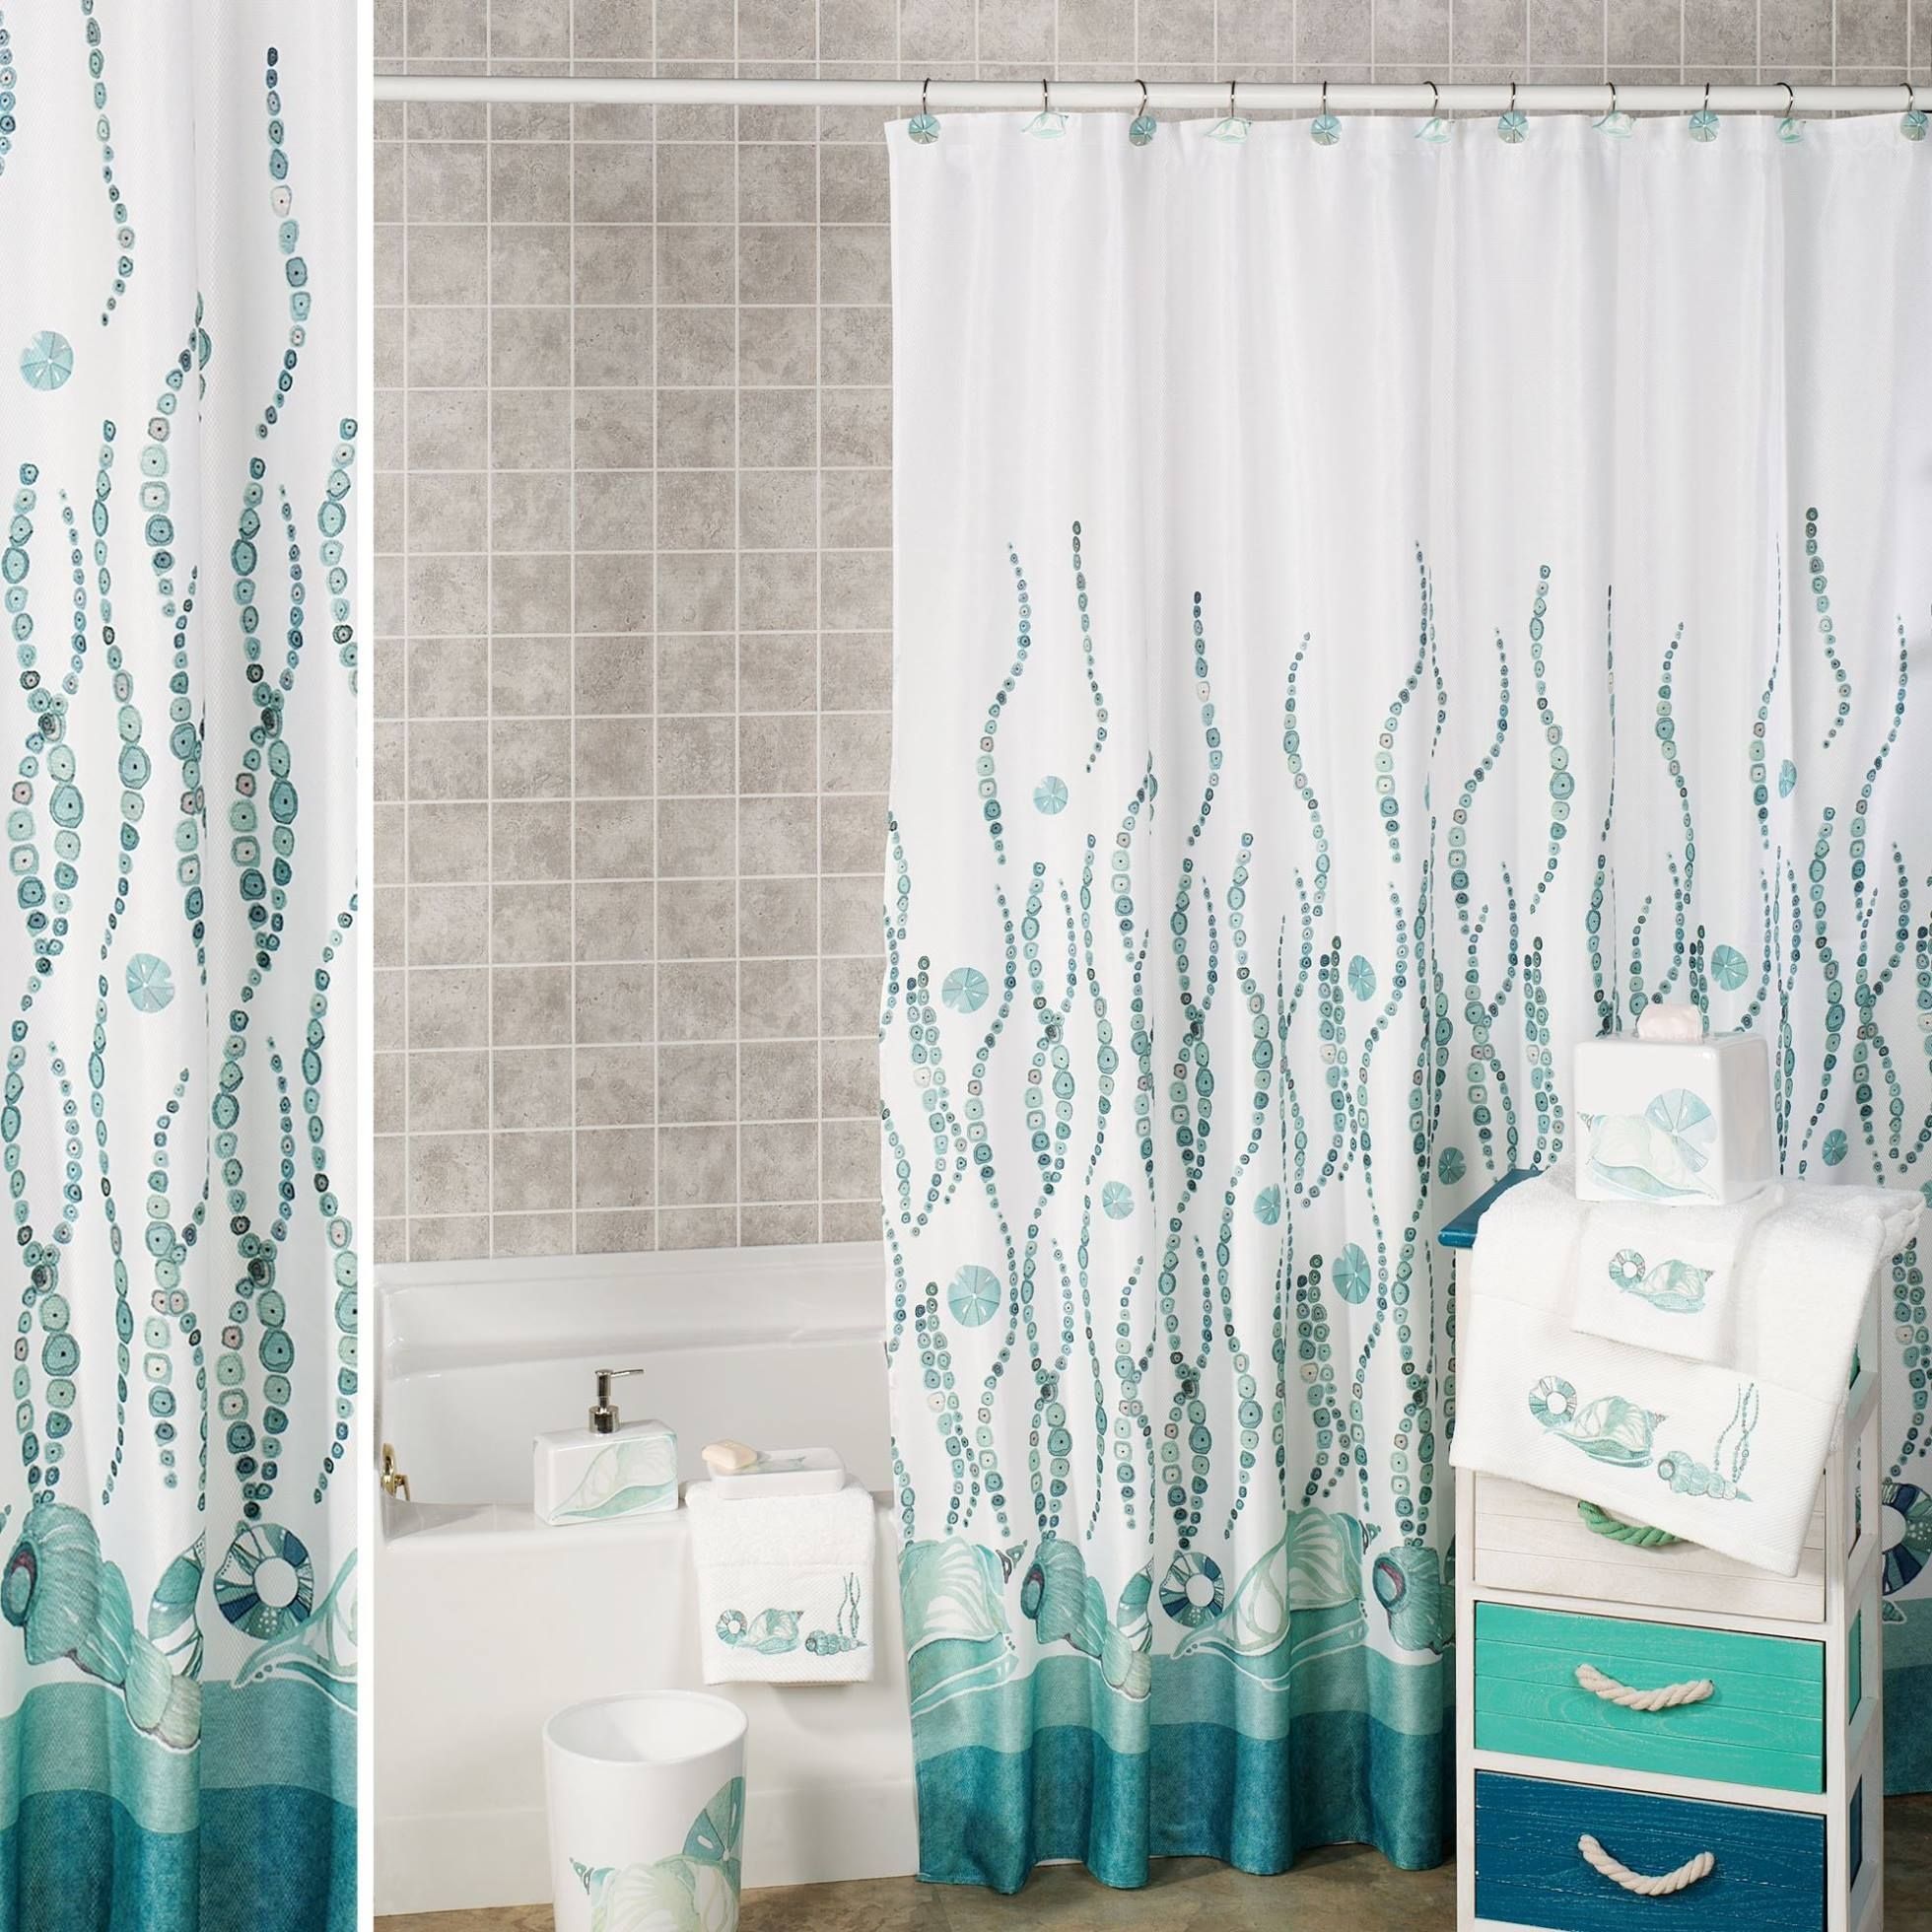 Shower Curtain For Clawfoot Tub Bed Bath And Beyond Curtain Intended For Shower Curtains For Clawfoot Tubs (View 23 of 25)